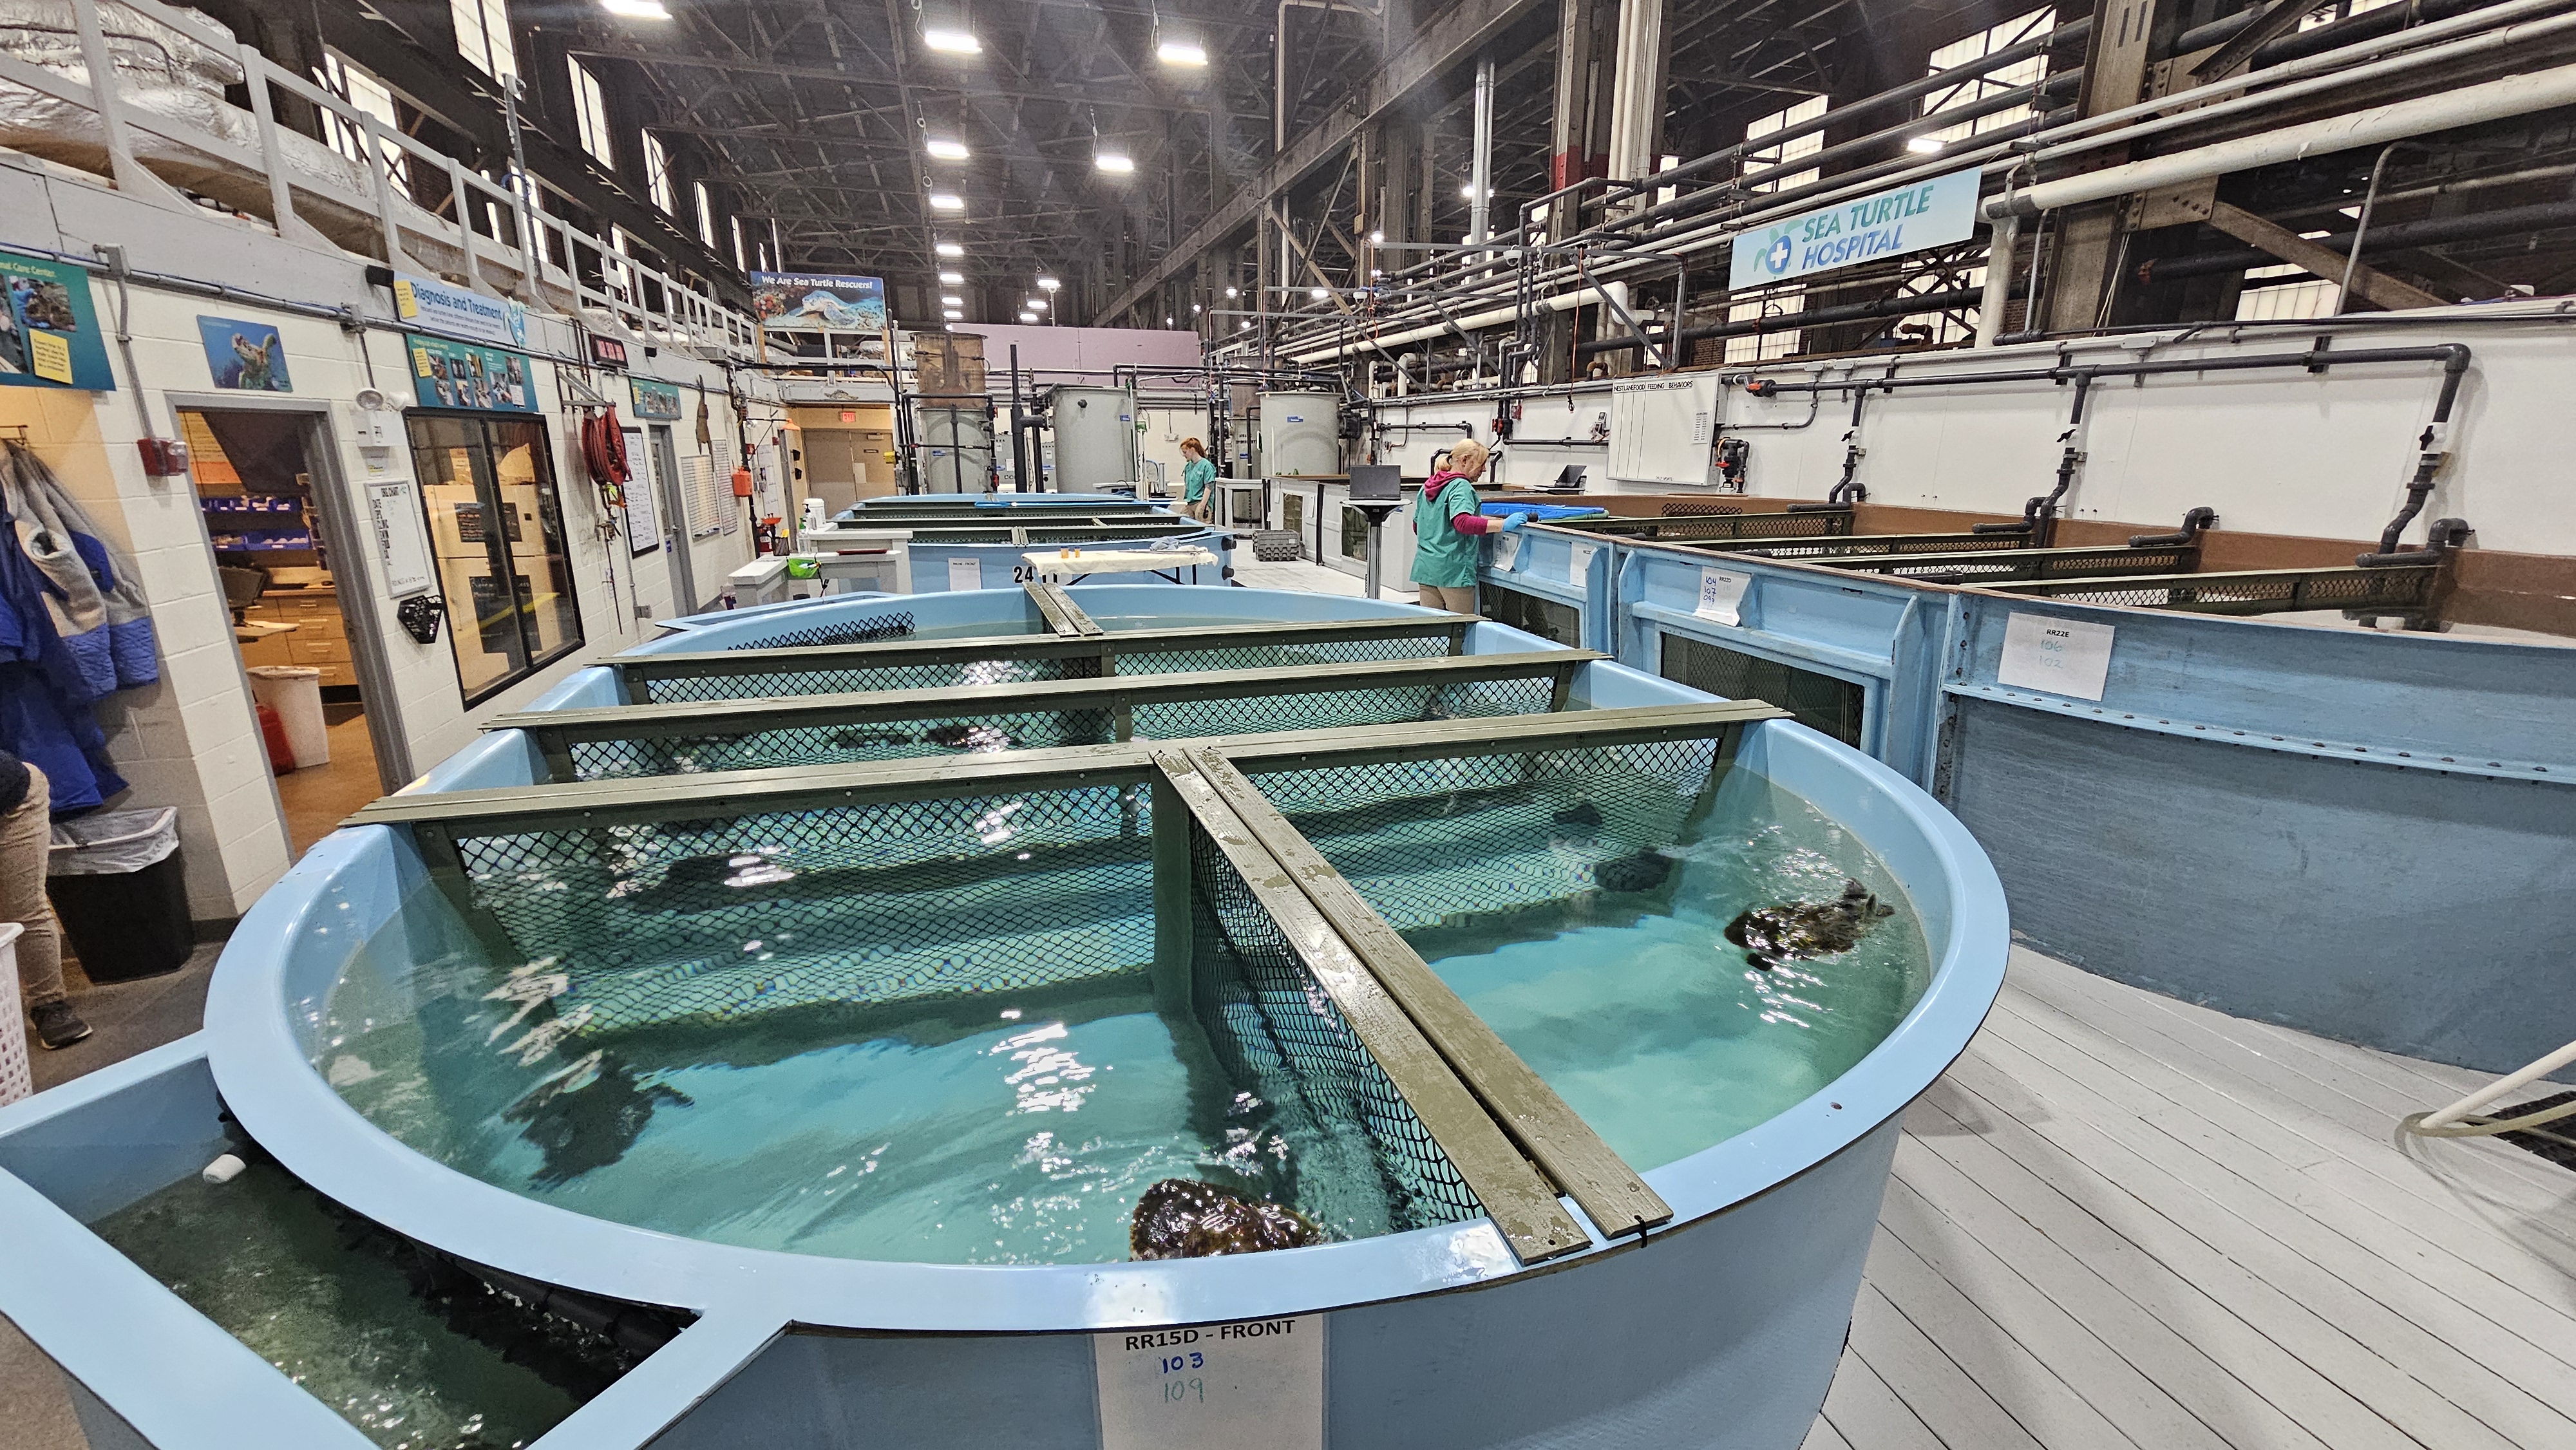 An image of the New England Aquarium Rescue Centre interior. There are several pools in the building for the recovering sea turtles.